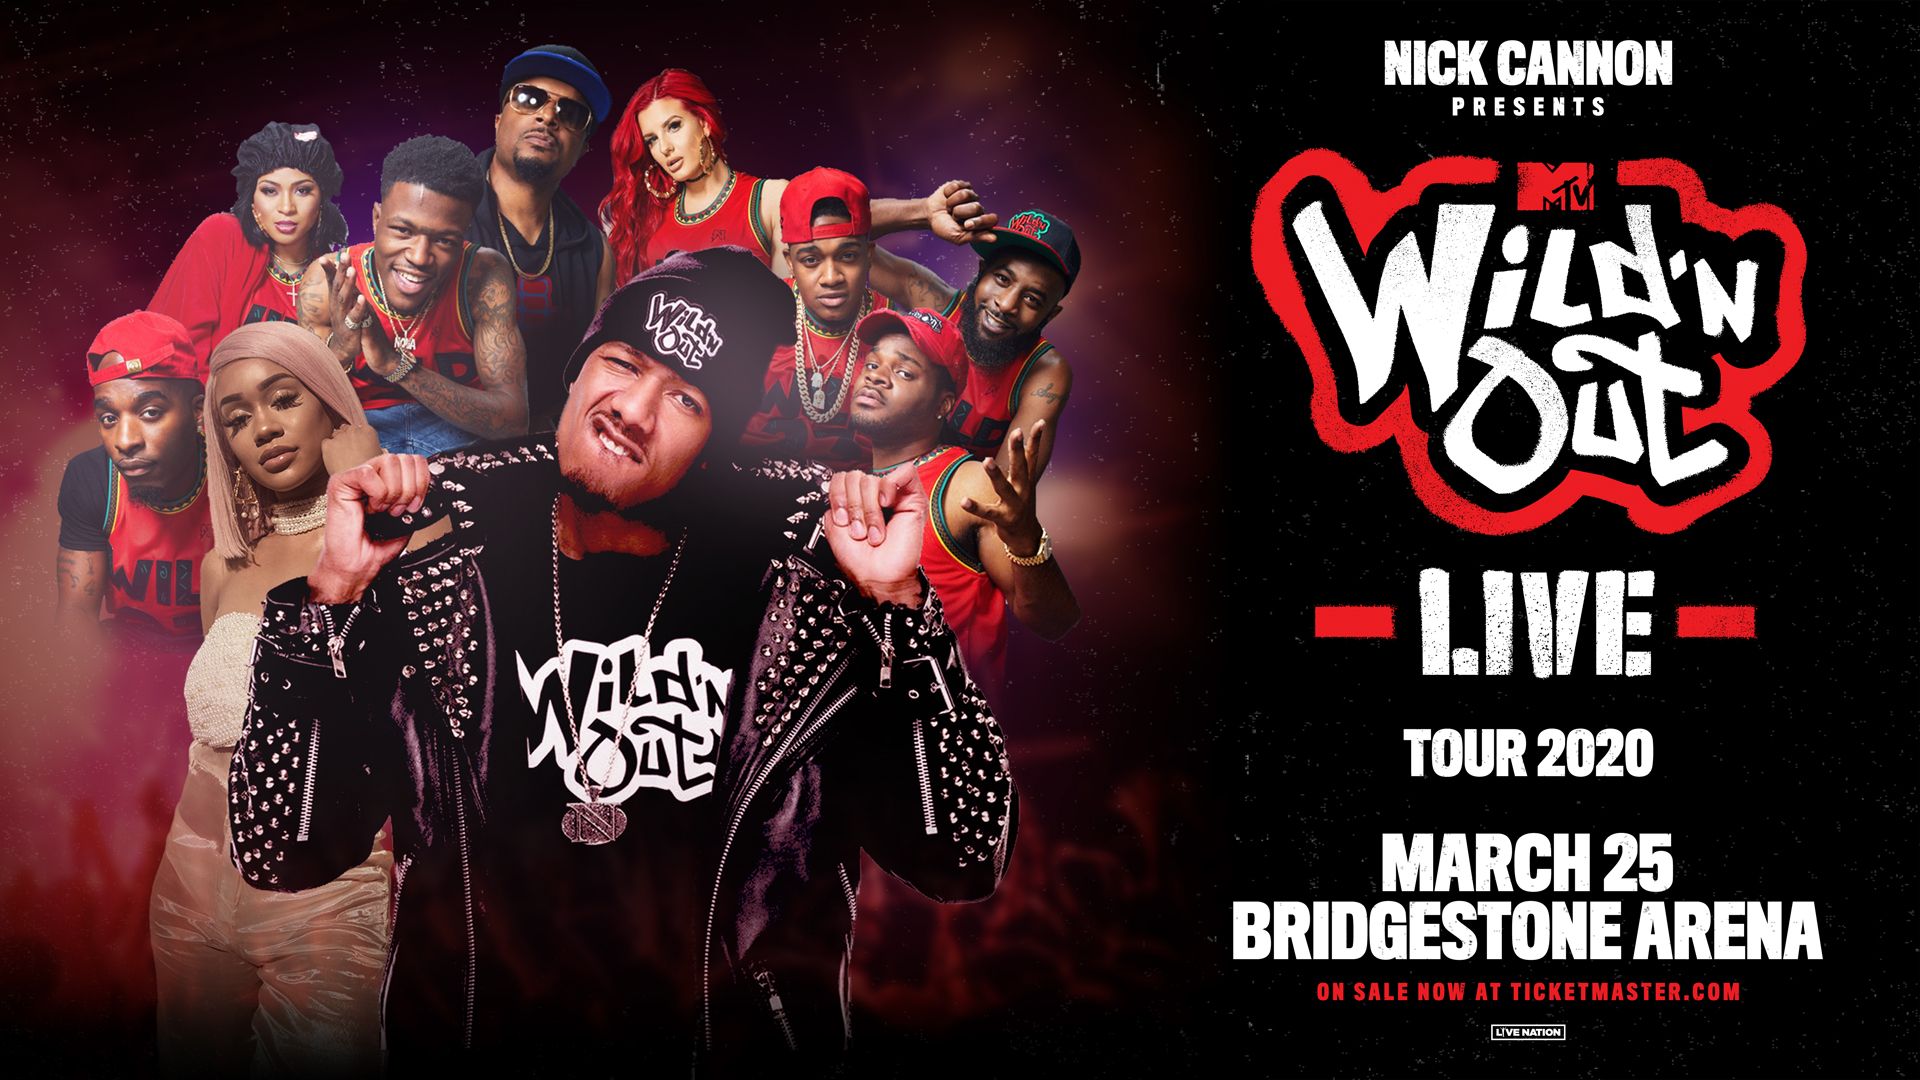 POSTPONED: Nick Cannon's MTV Wild N' Out